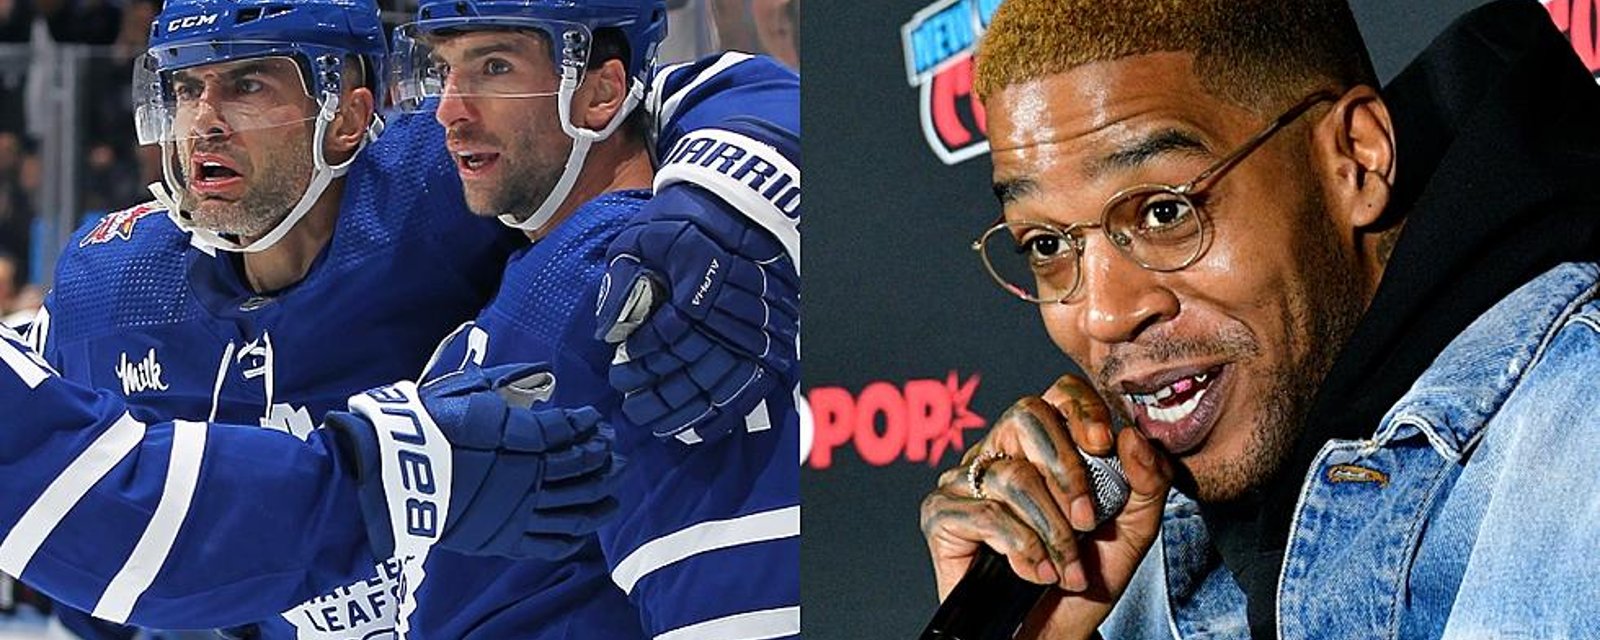 Yet another level reached in the Maple Leafs goal song saga… 